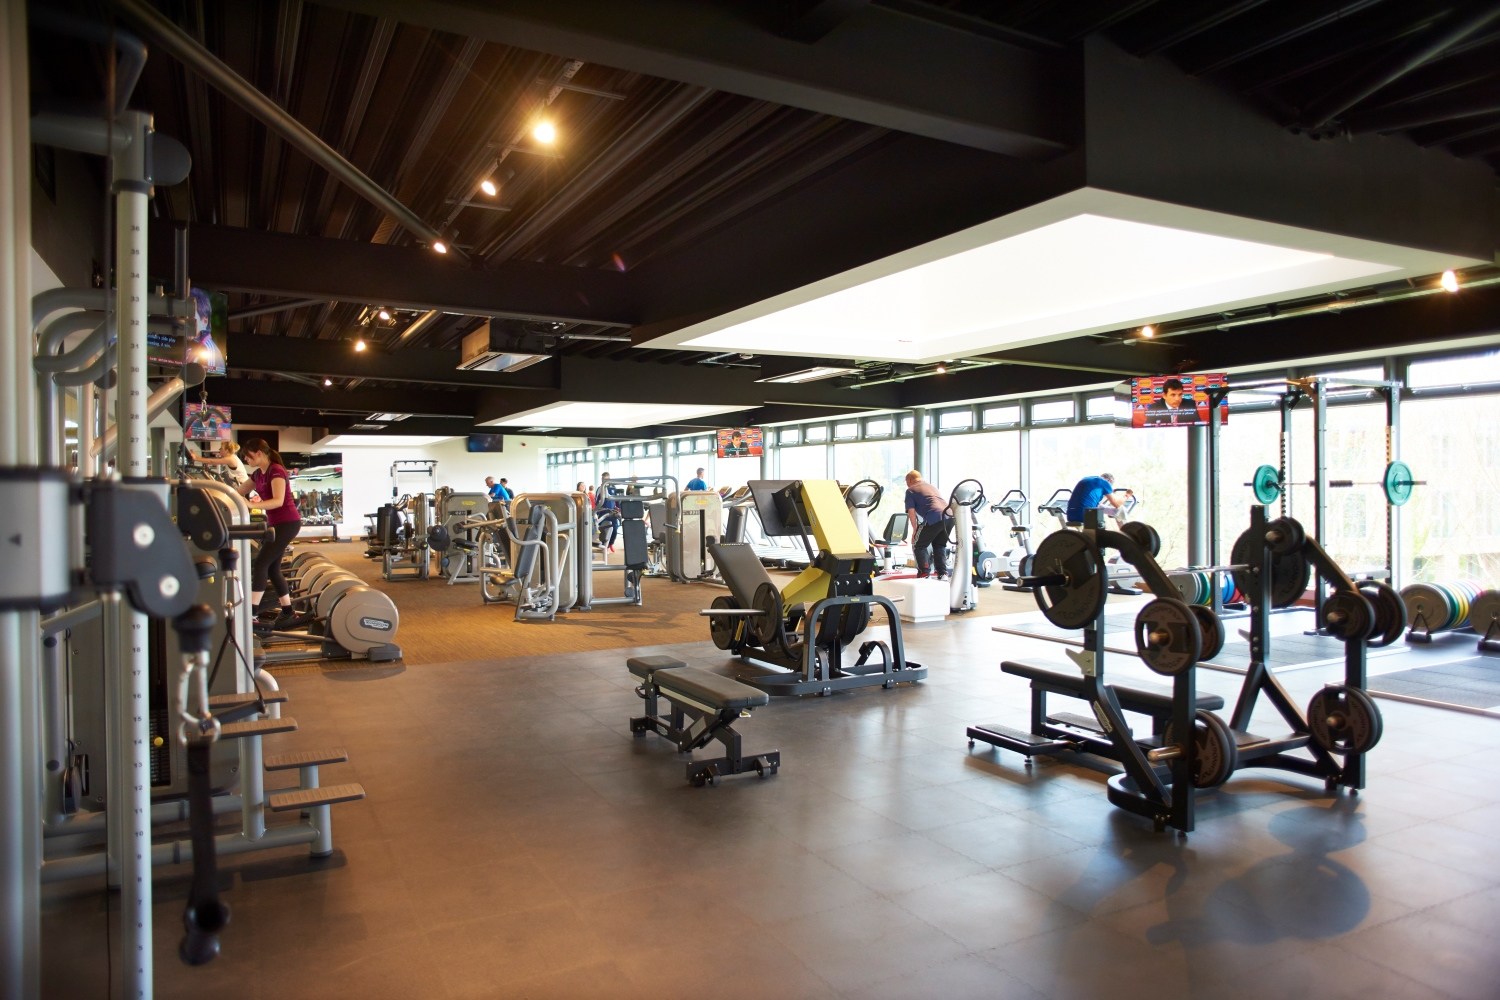 Fitness suite in the Sports Centre.